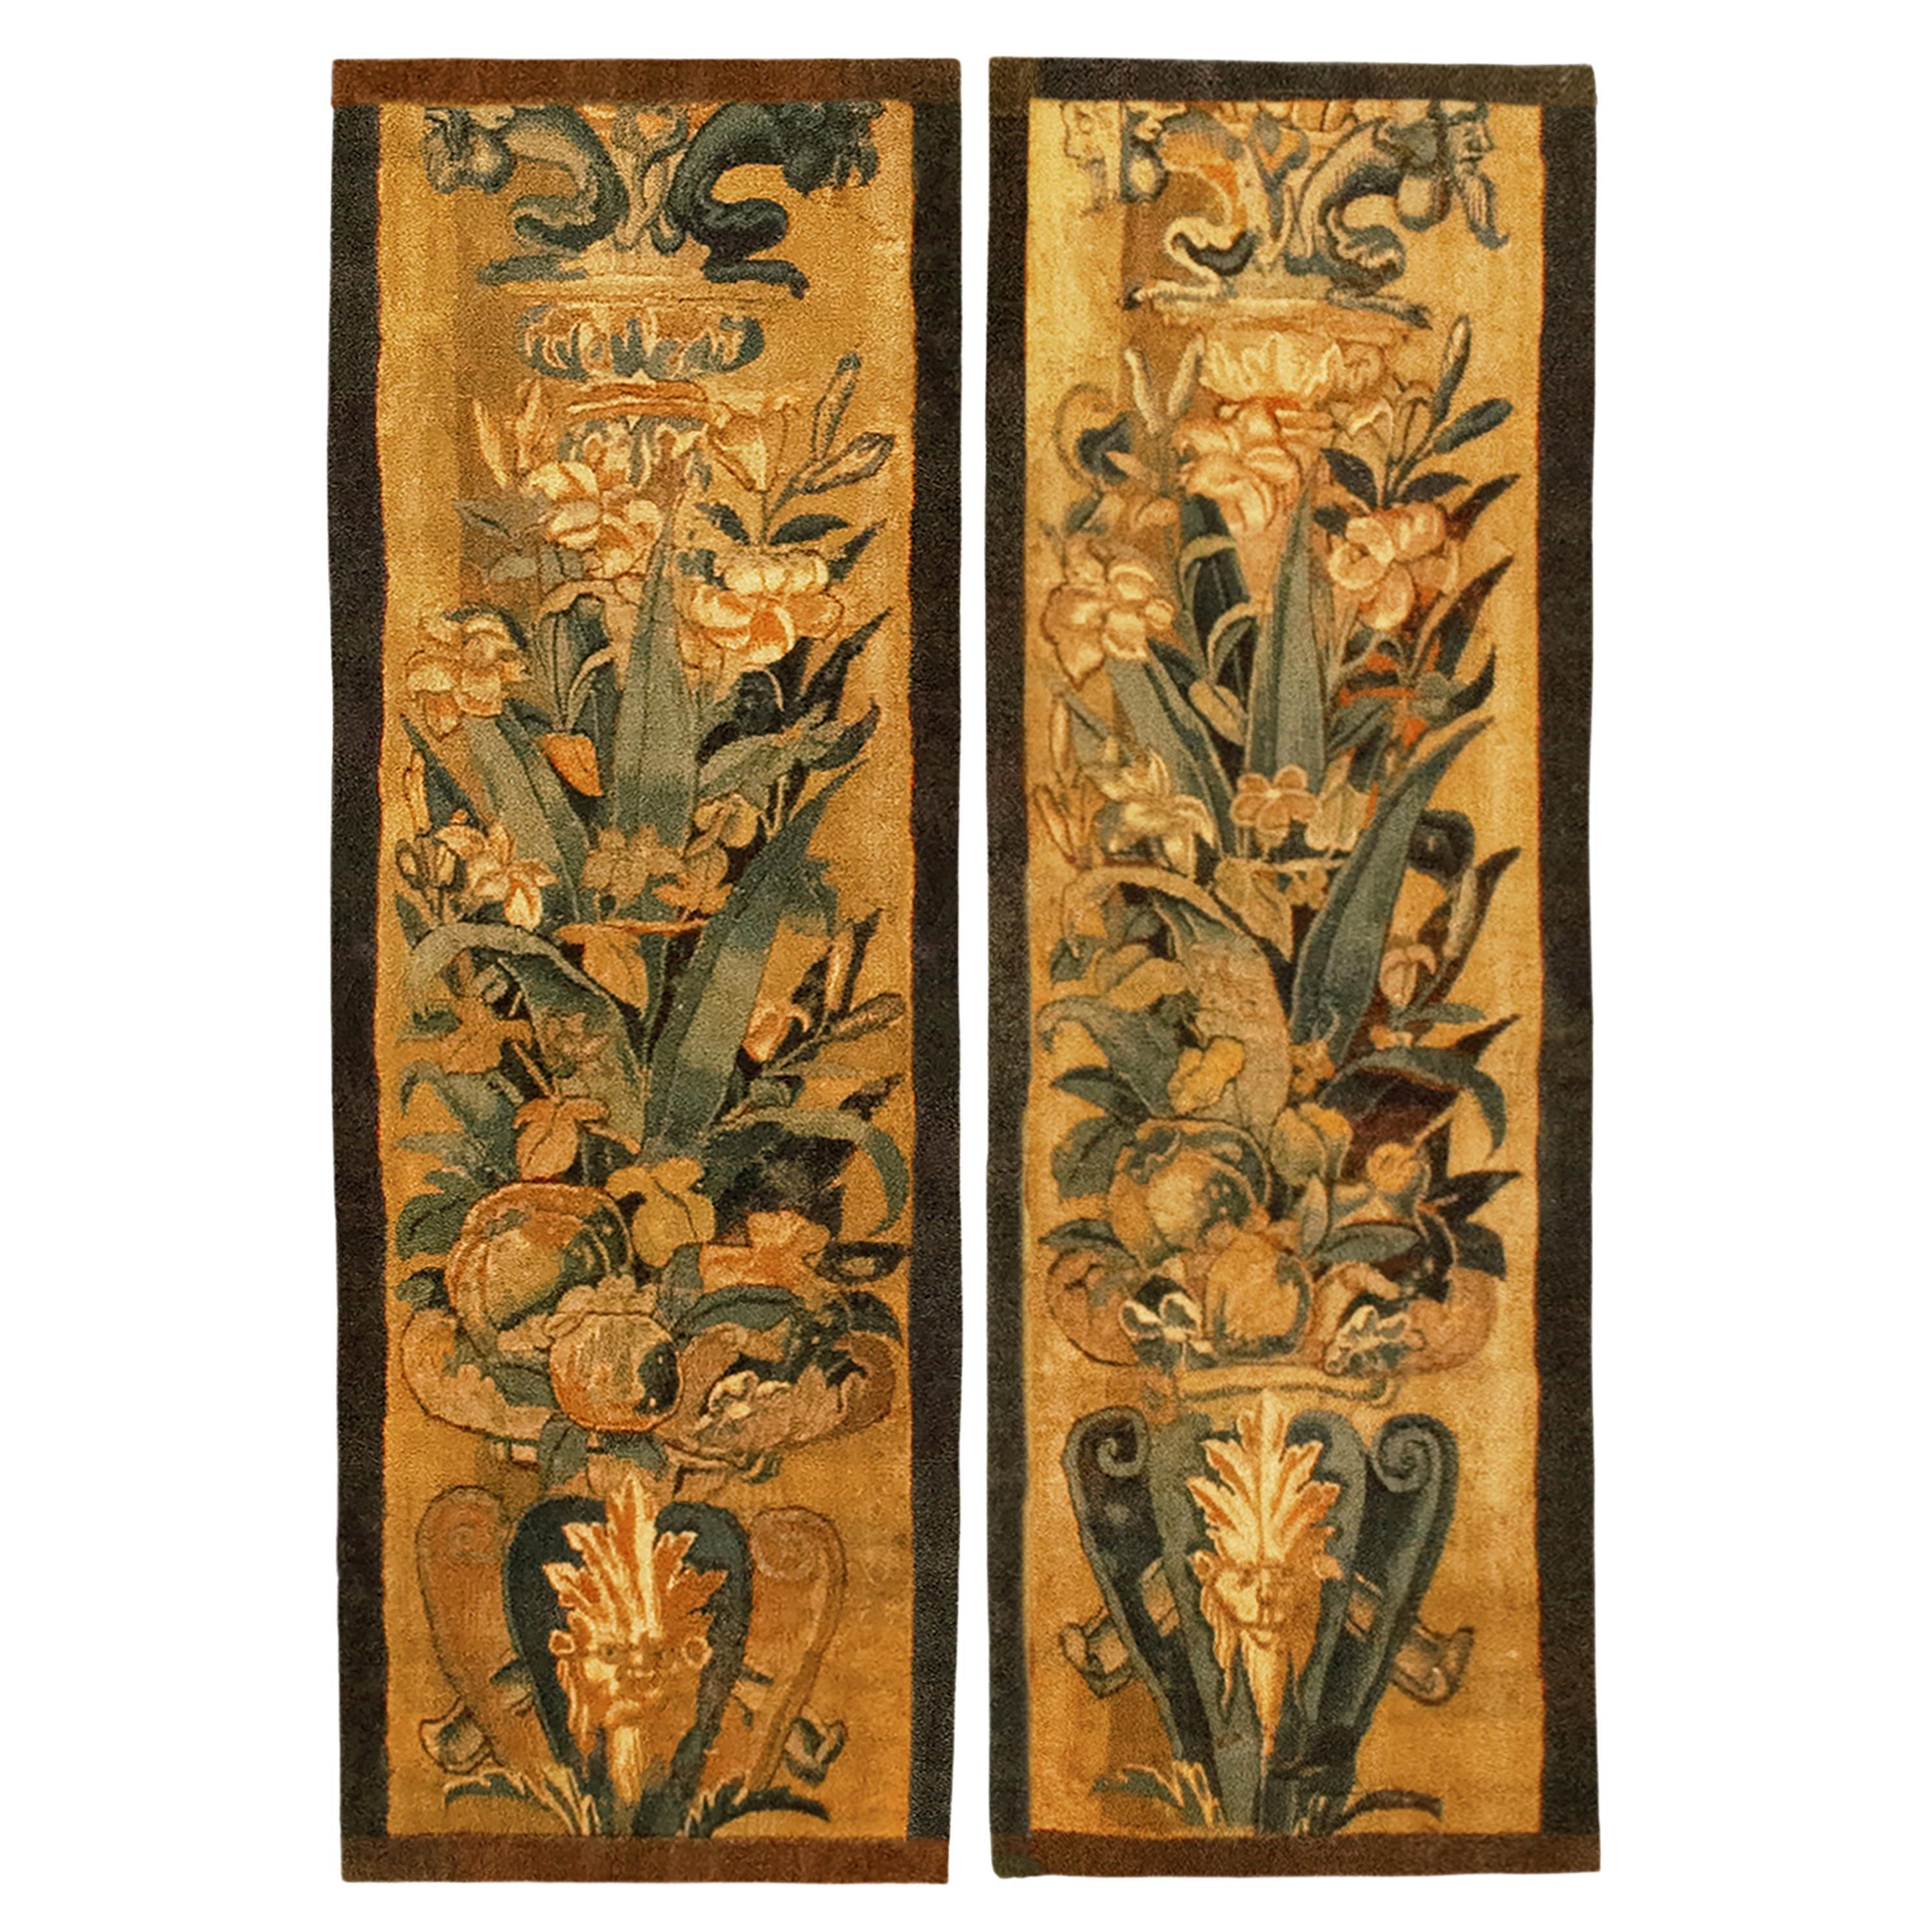 Vertically Oriented Pair of Late 16th Century Flemish Historical Tapestry Panels